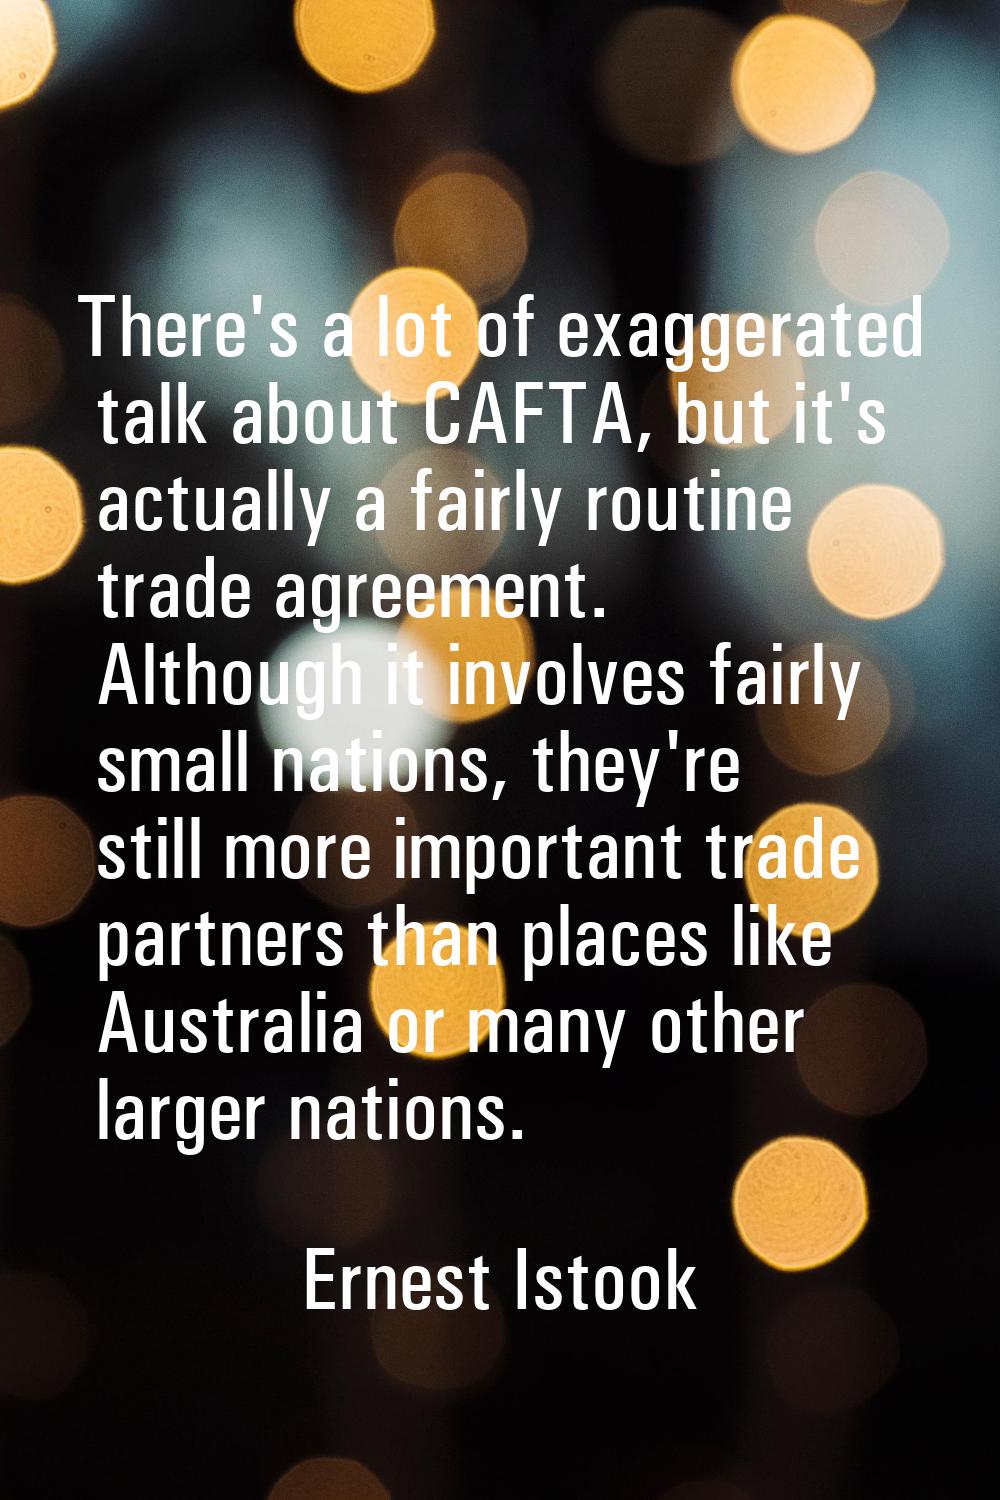 There's a lot of exaggerated talk about CAFTA, but it's actually a fairly routine trade agreement. 